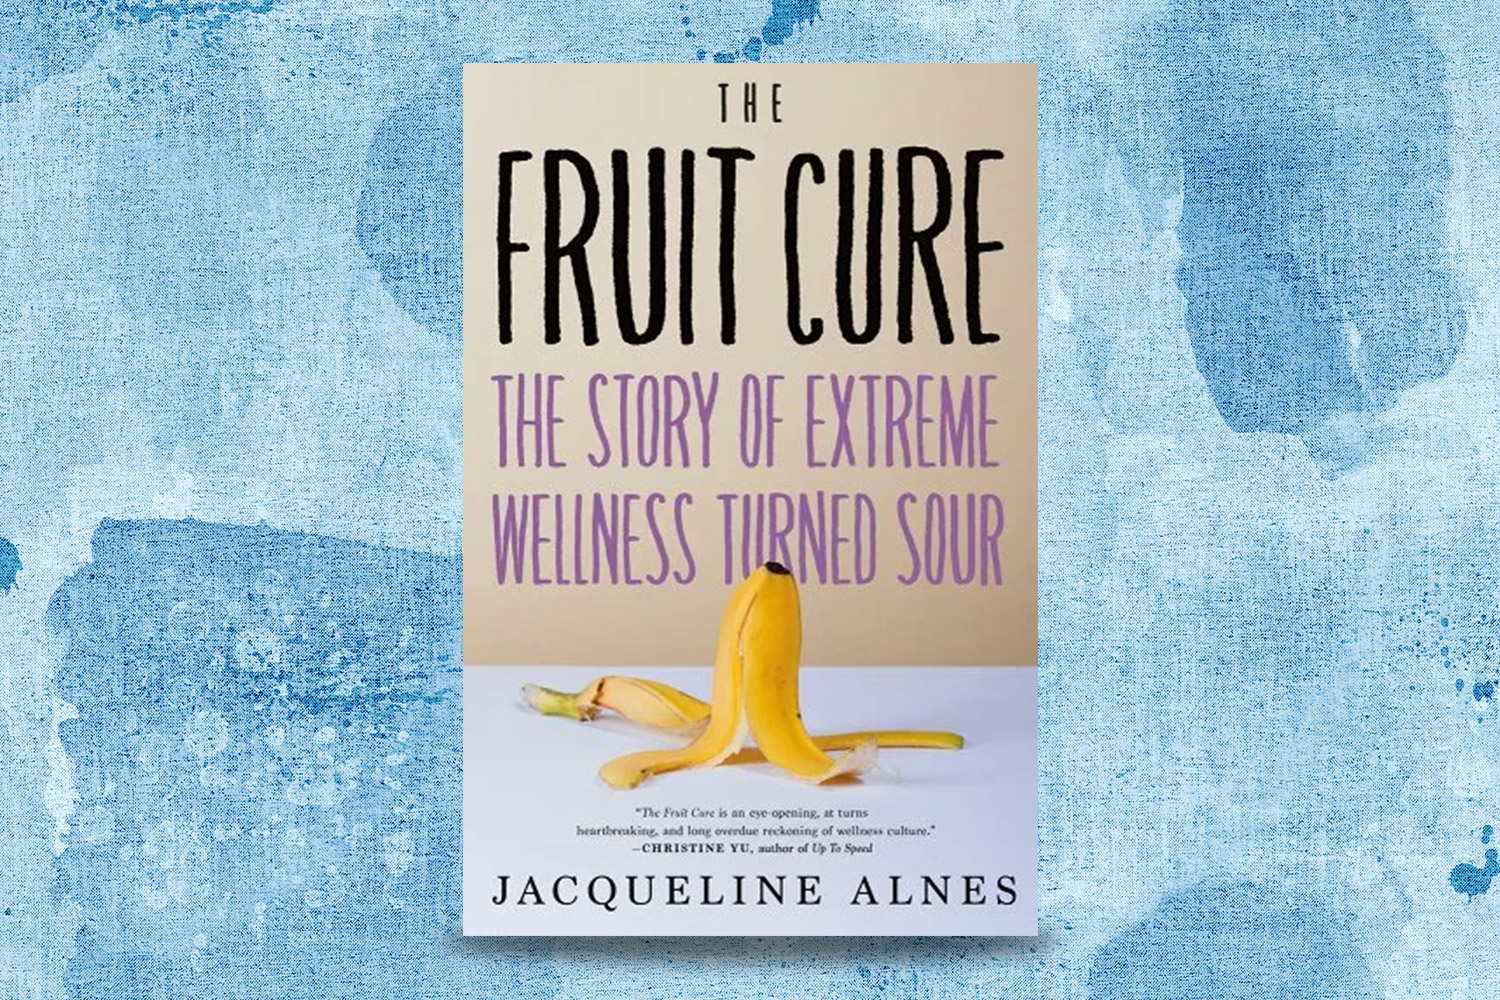 Jacqueline Alnes, The Fruit Cure: The Story of Extreme Wellness Turned Sour